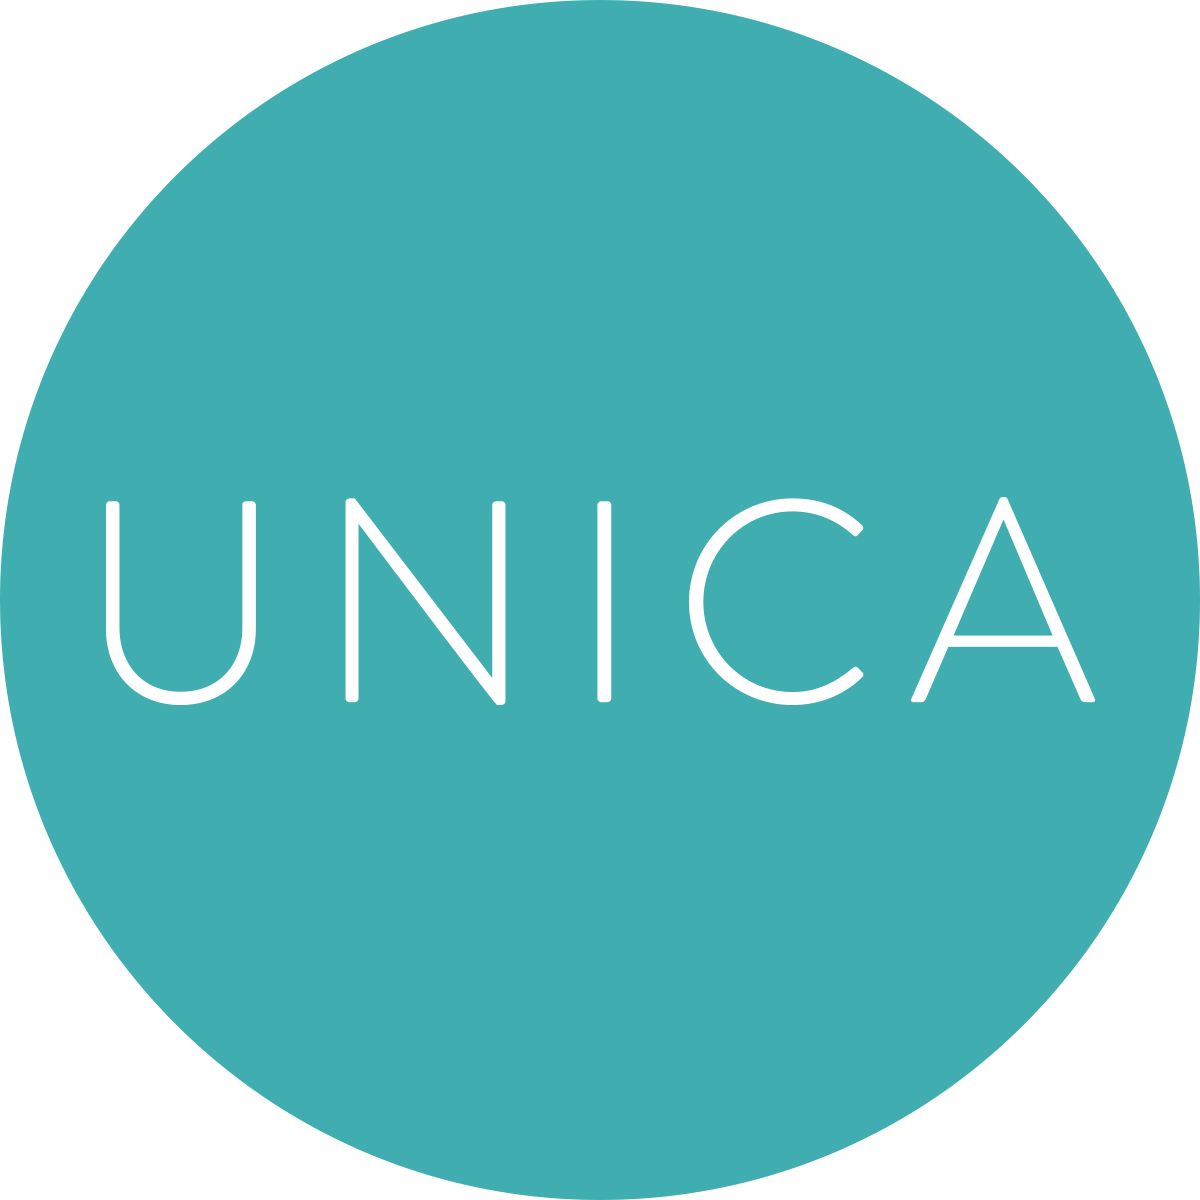 The Official Twitter Account of clothing brand UNICA. IG: wearunica